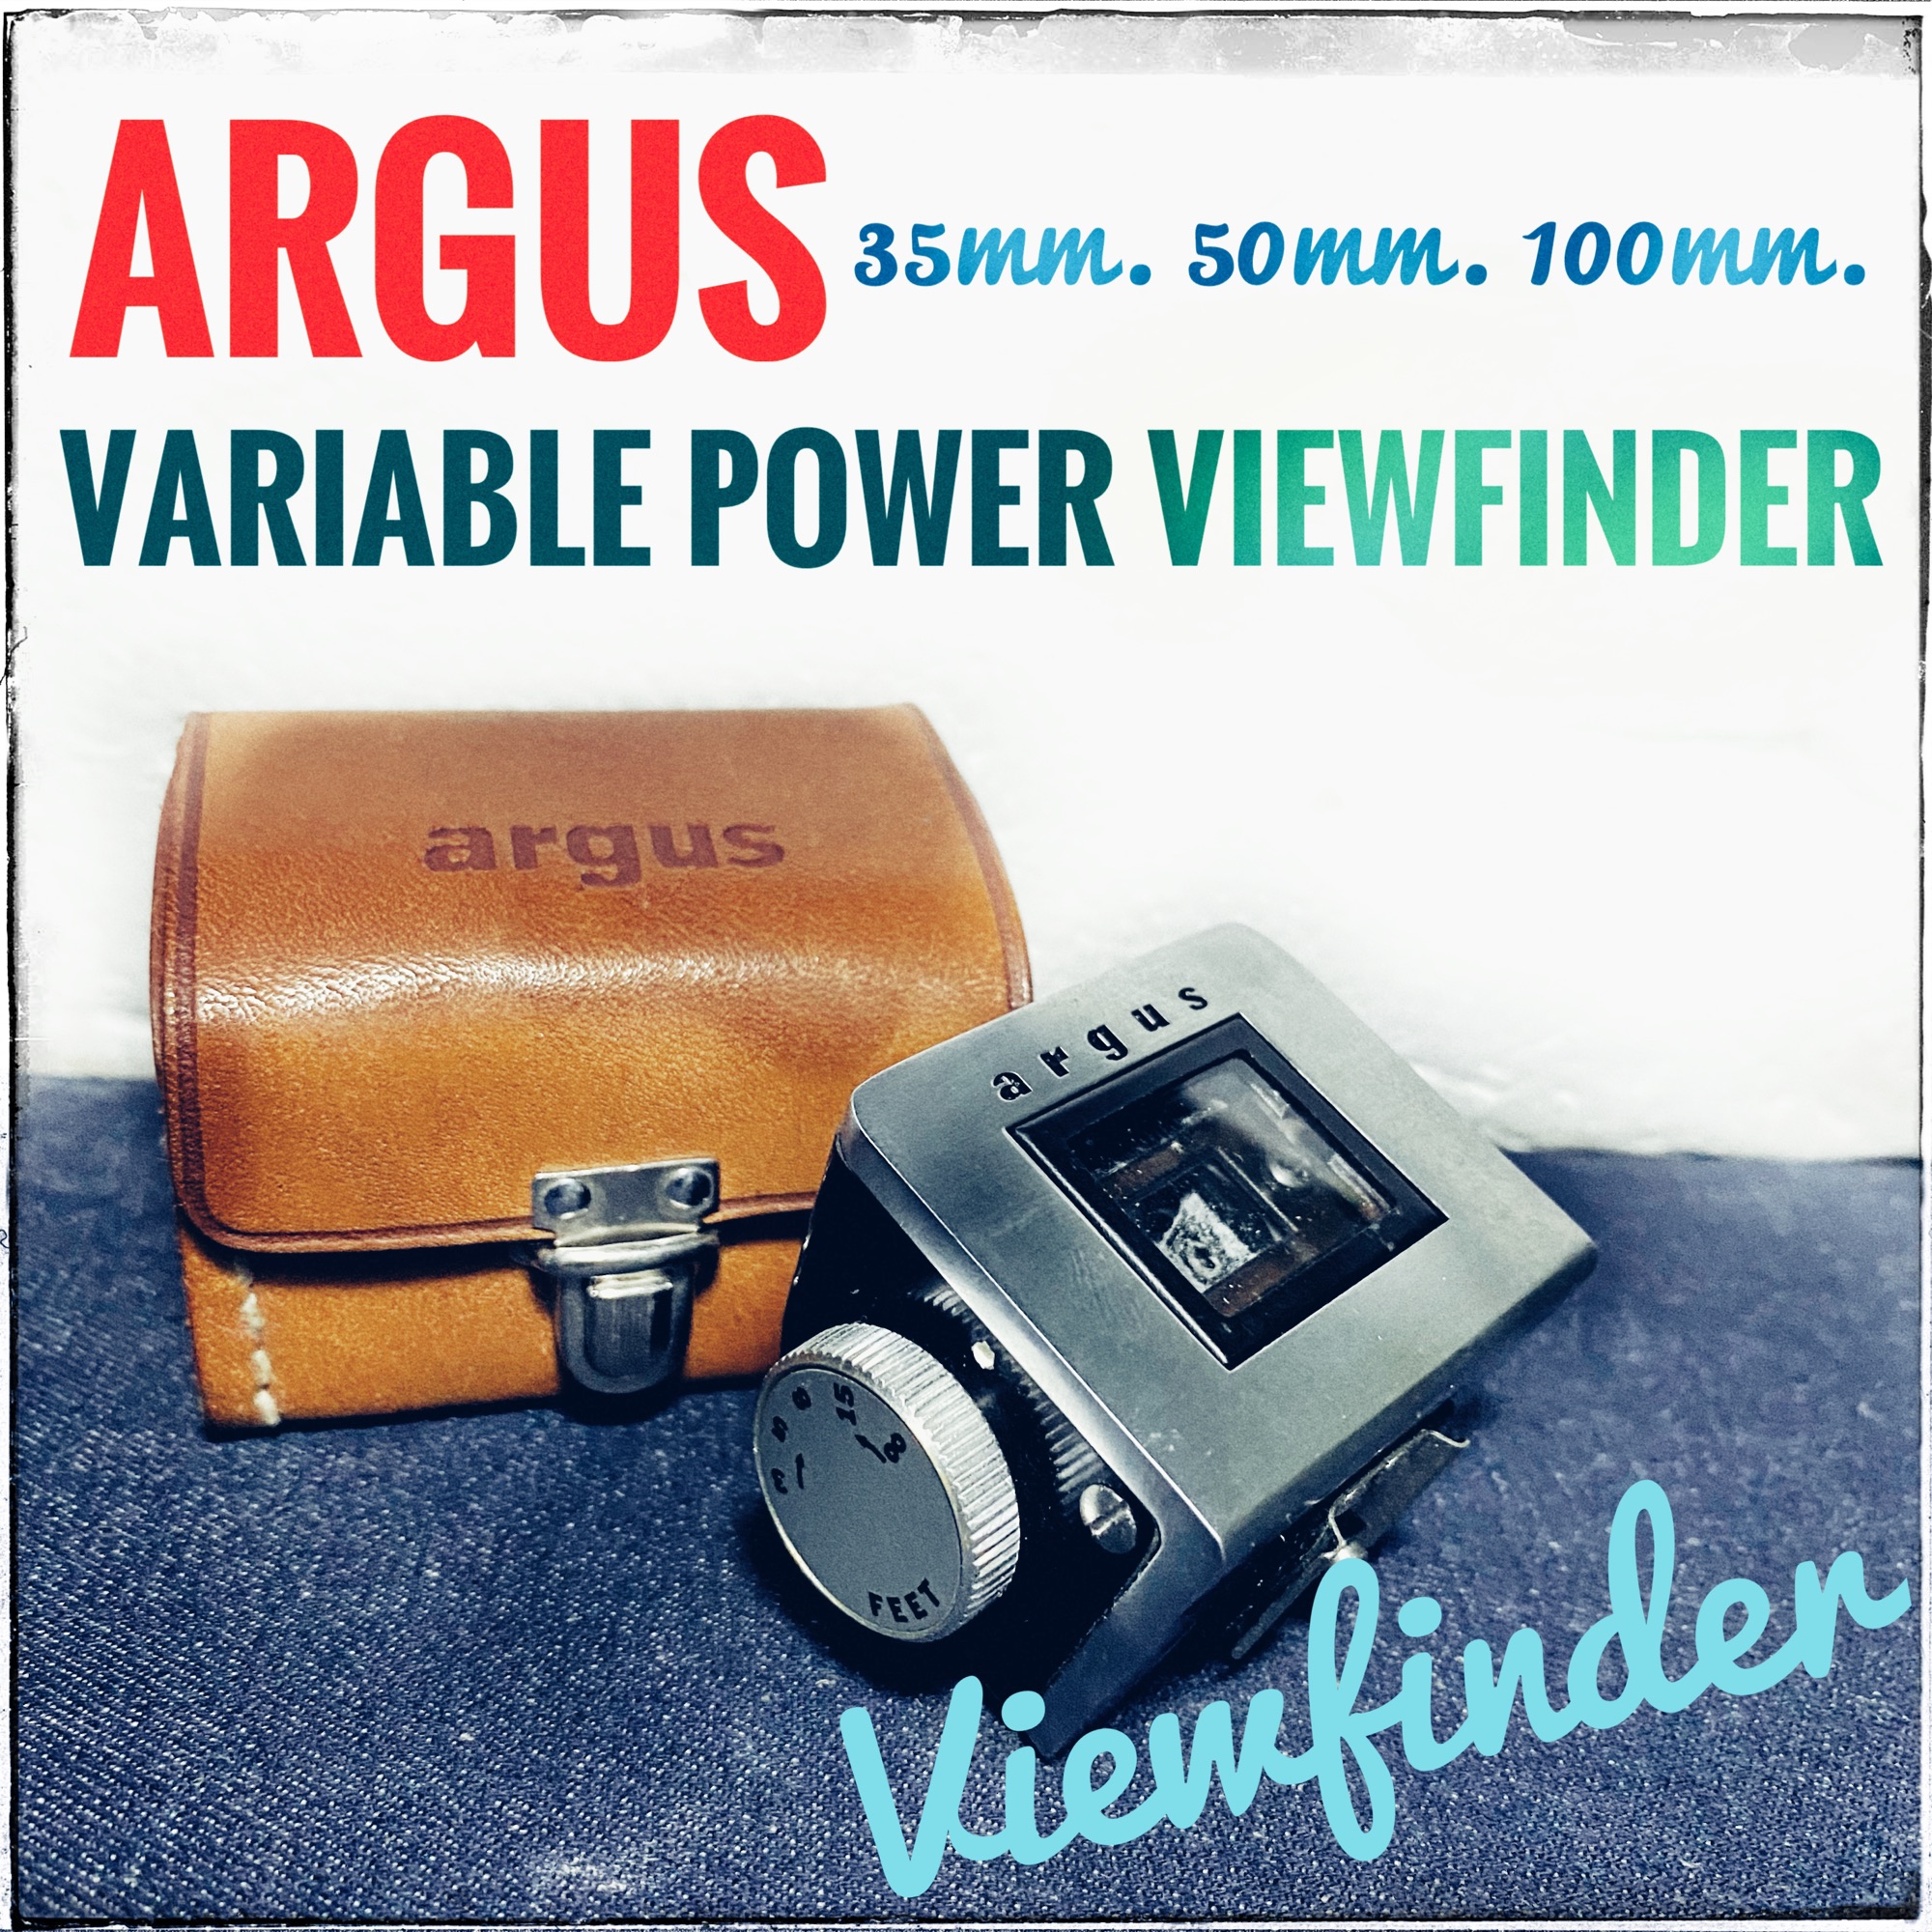 Rare Argus Viewfinder Variable Power 35mm. 50mm. 100mm.